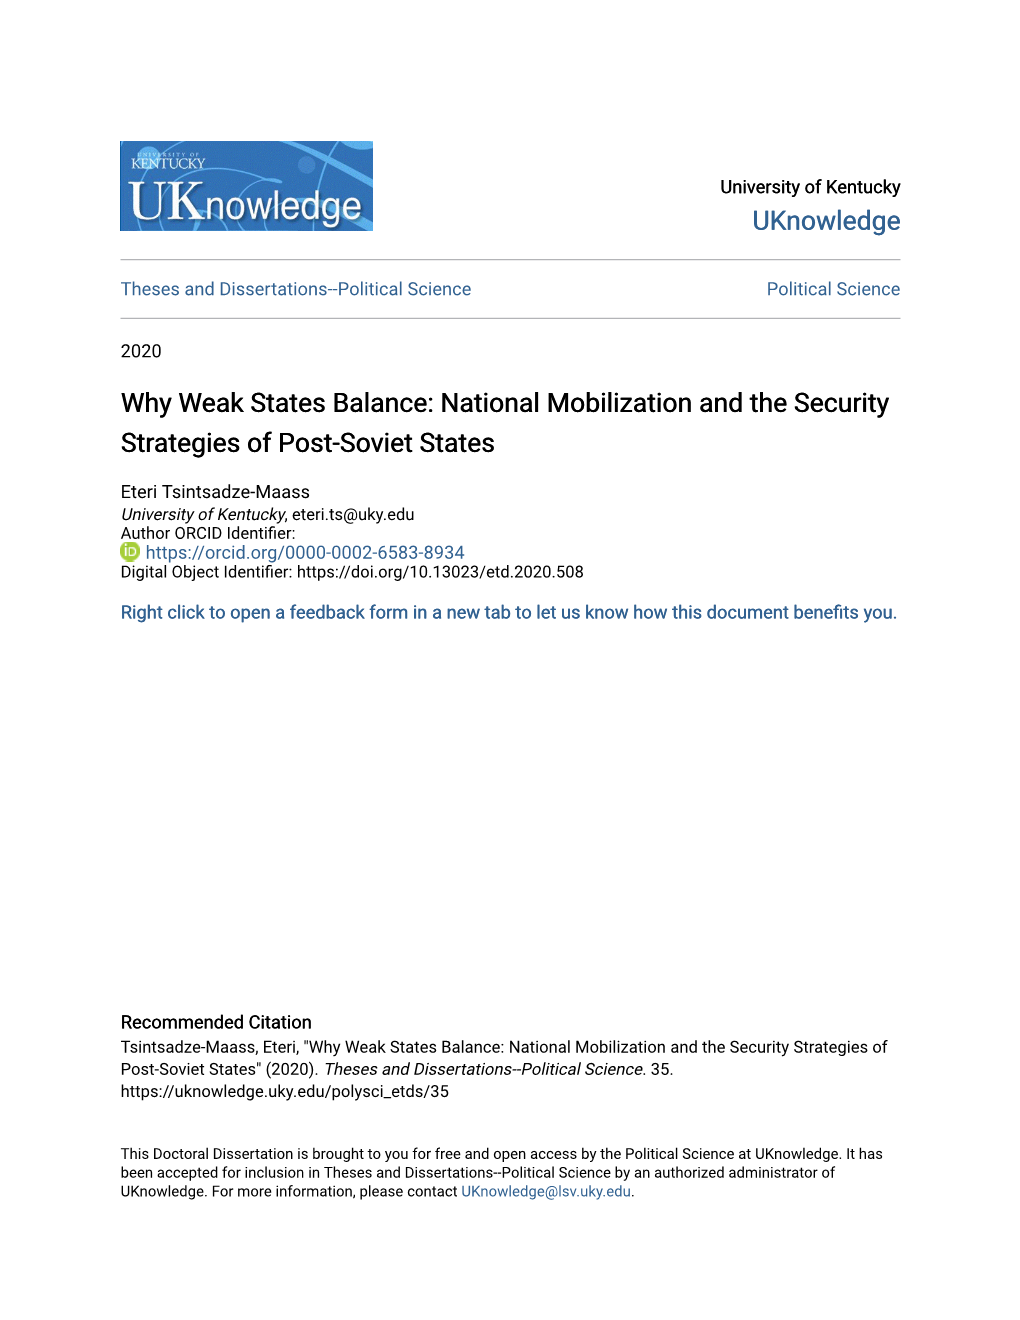 National Mobilization and the Security Strategies of Post-Soviet States